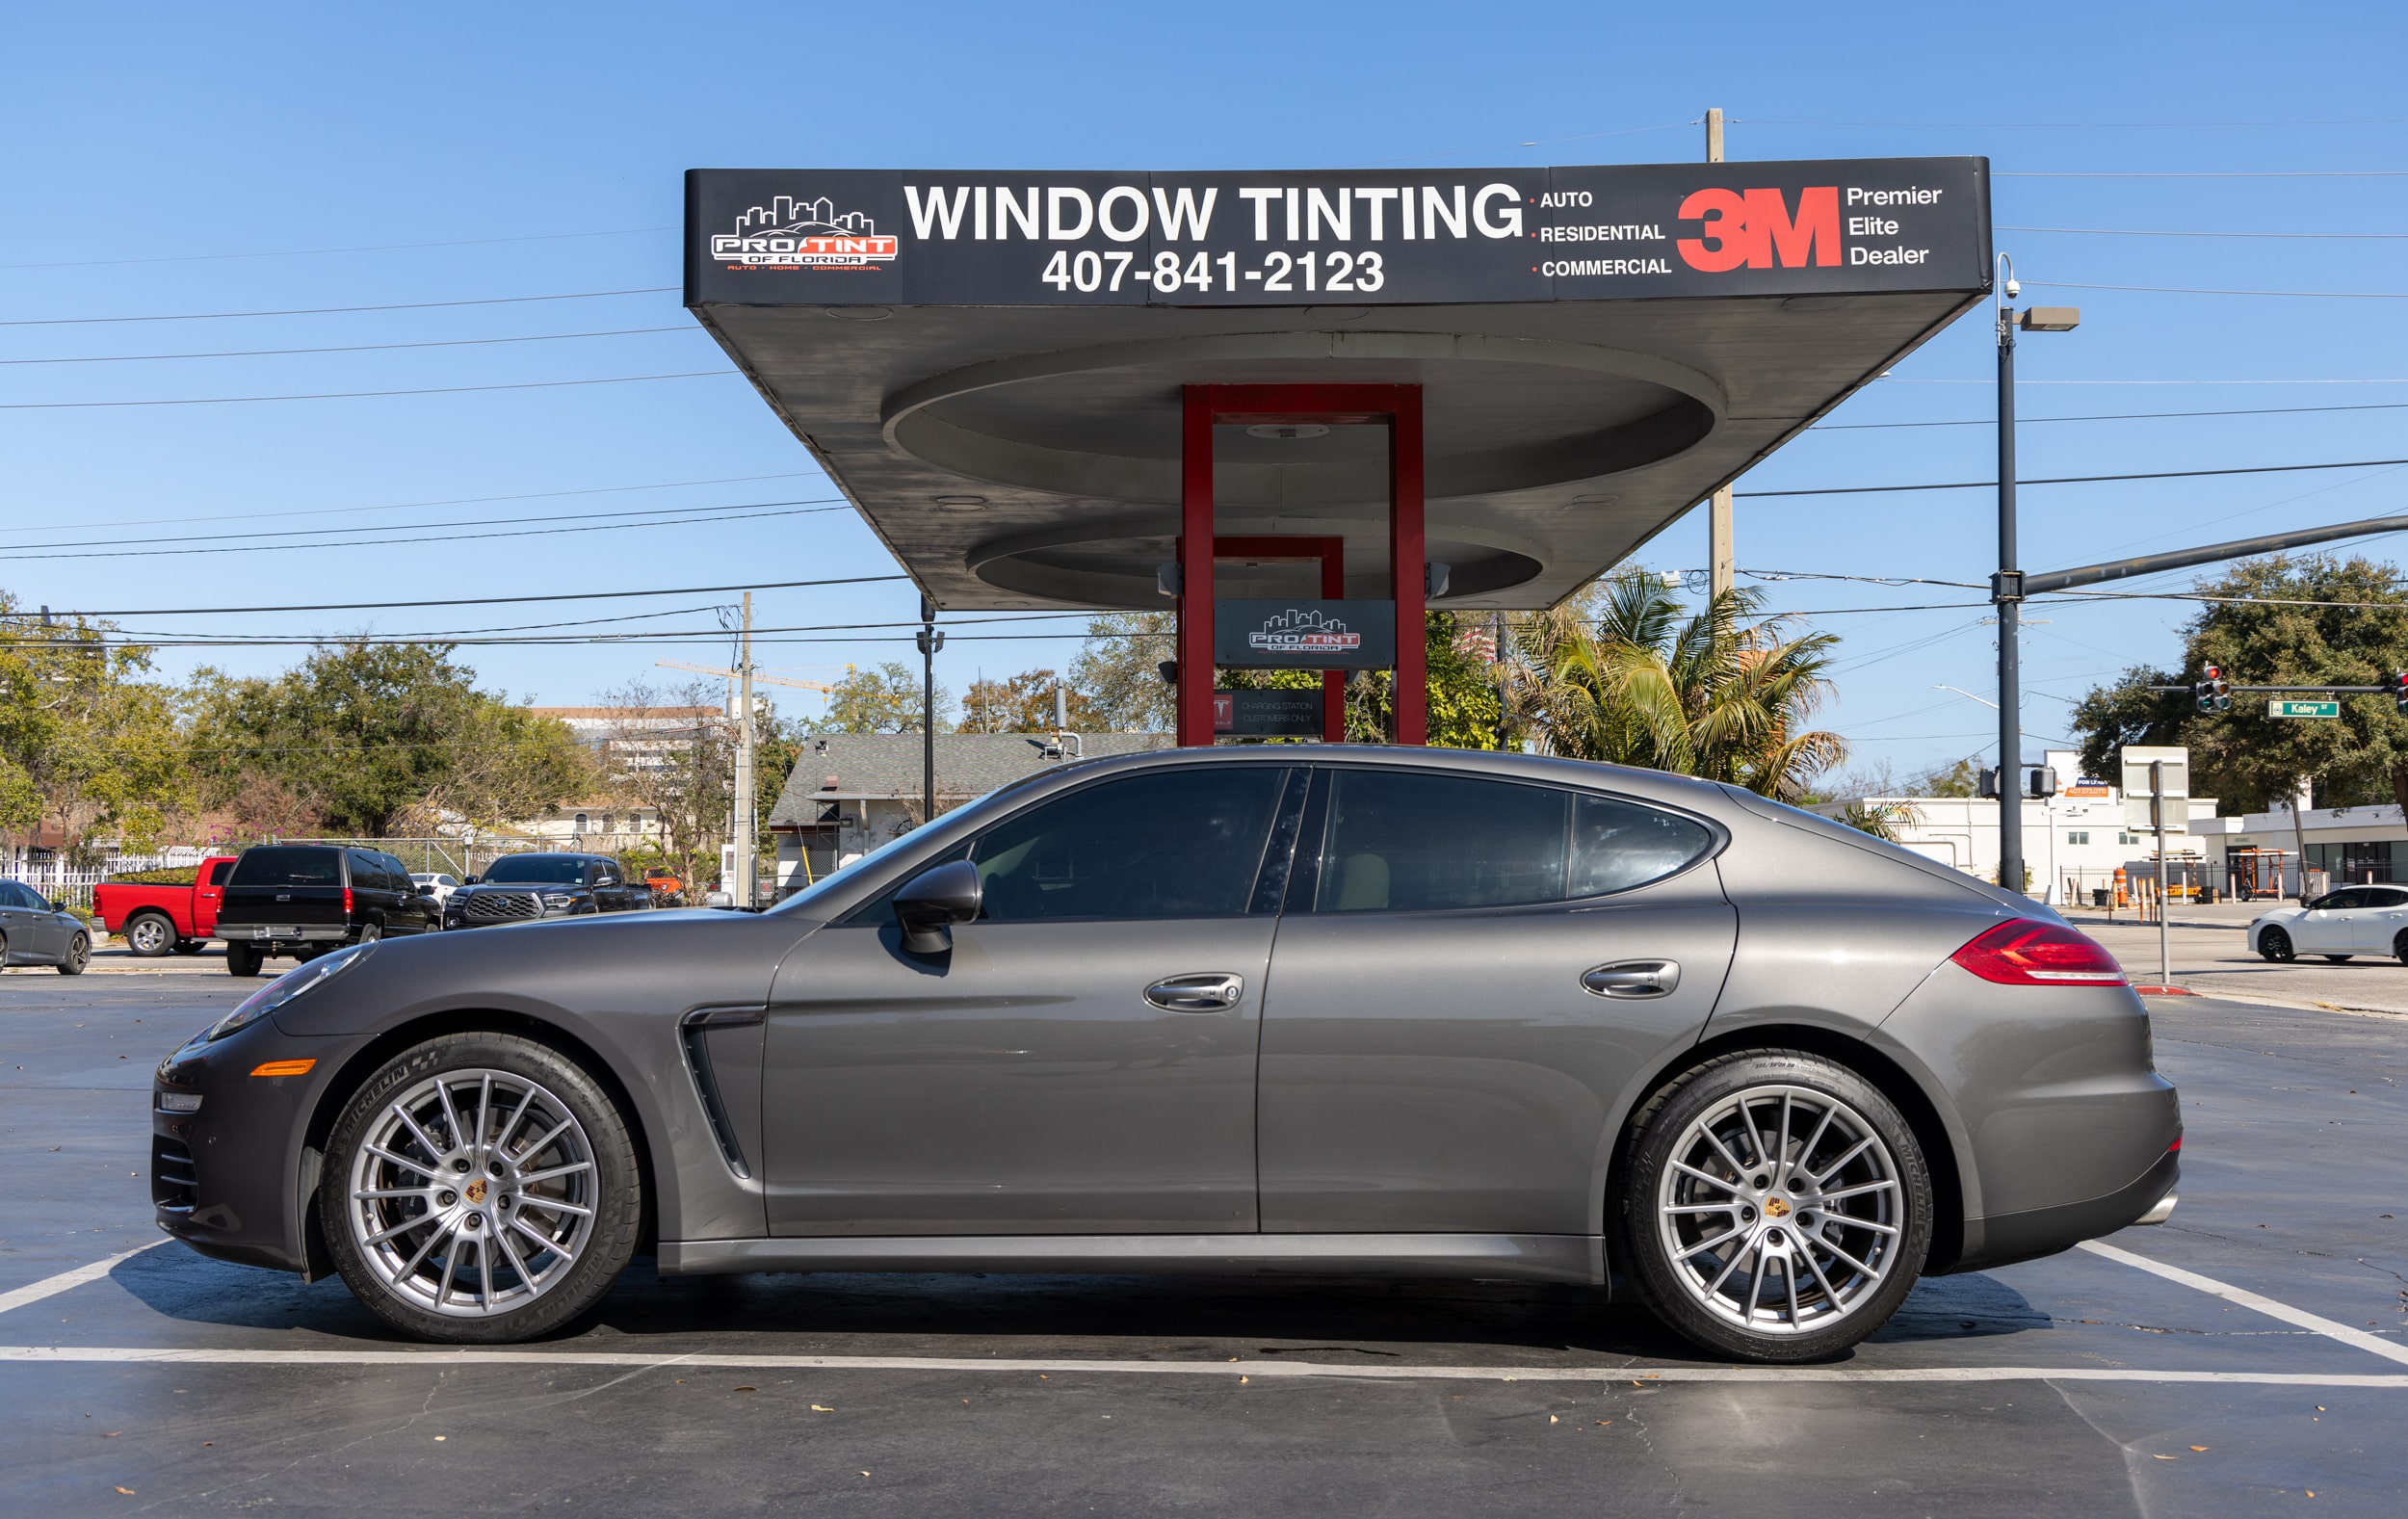 How To Care For Newly Installed Car Window Tint - Pro Tint of Orlando